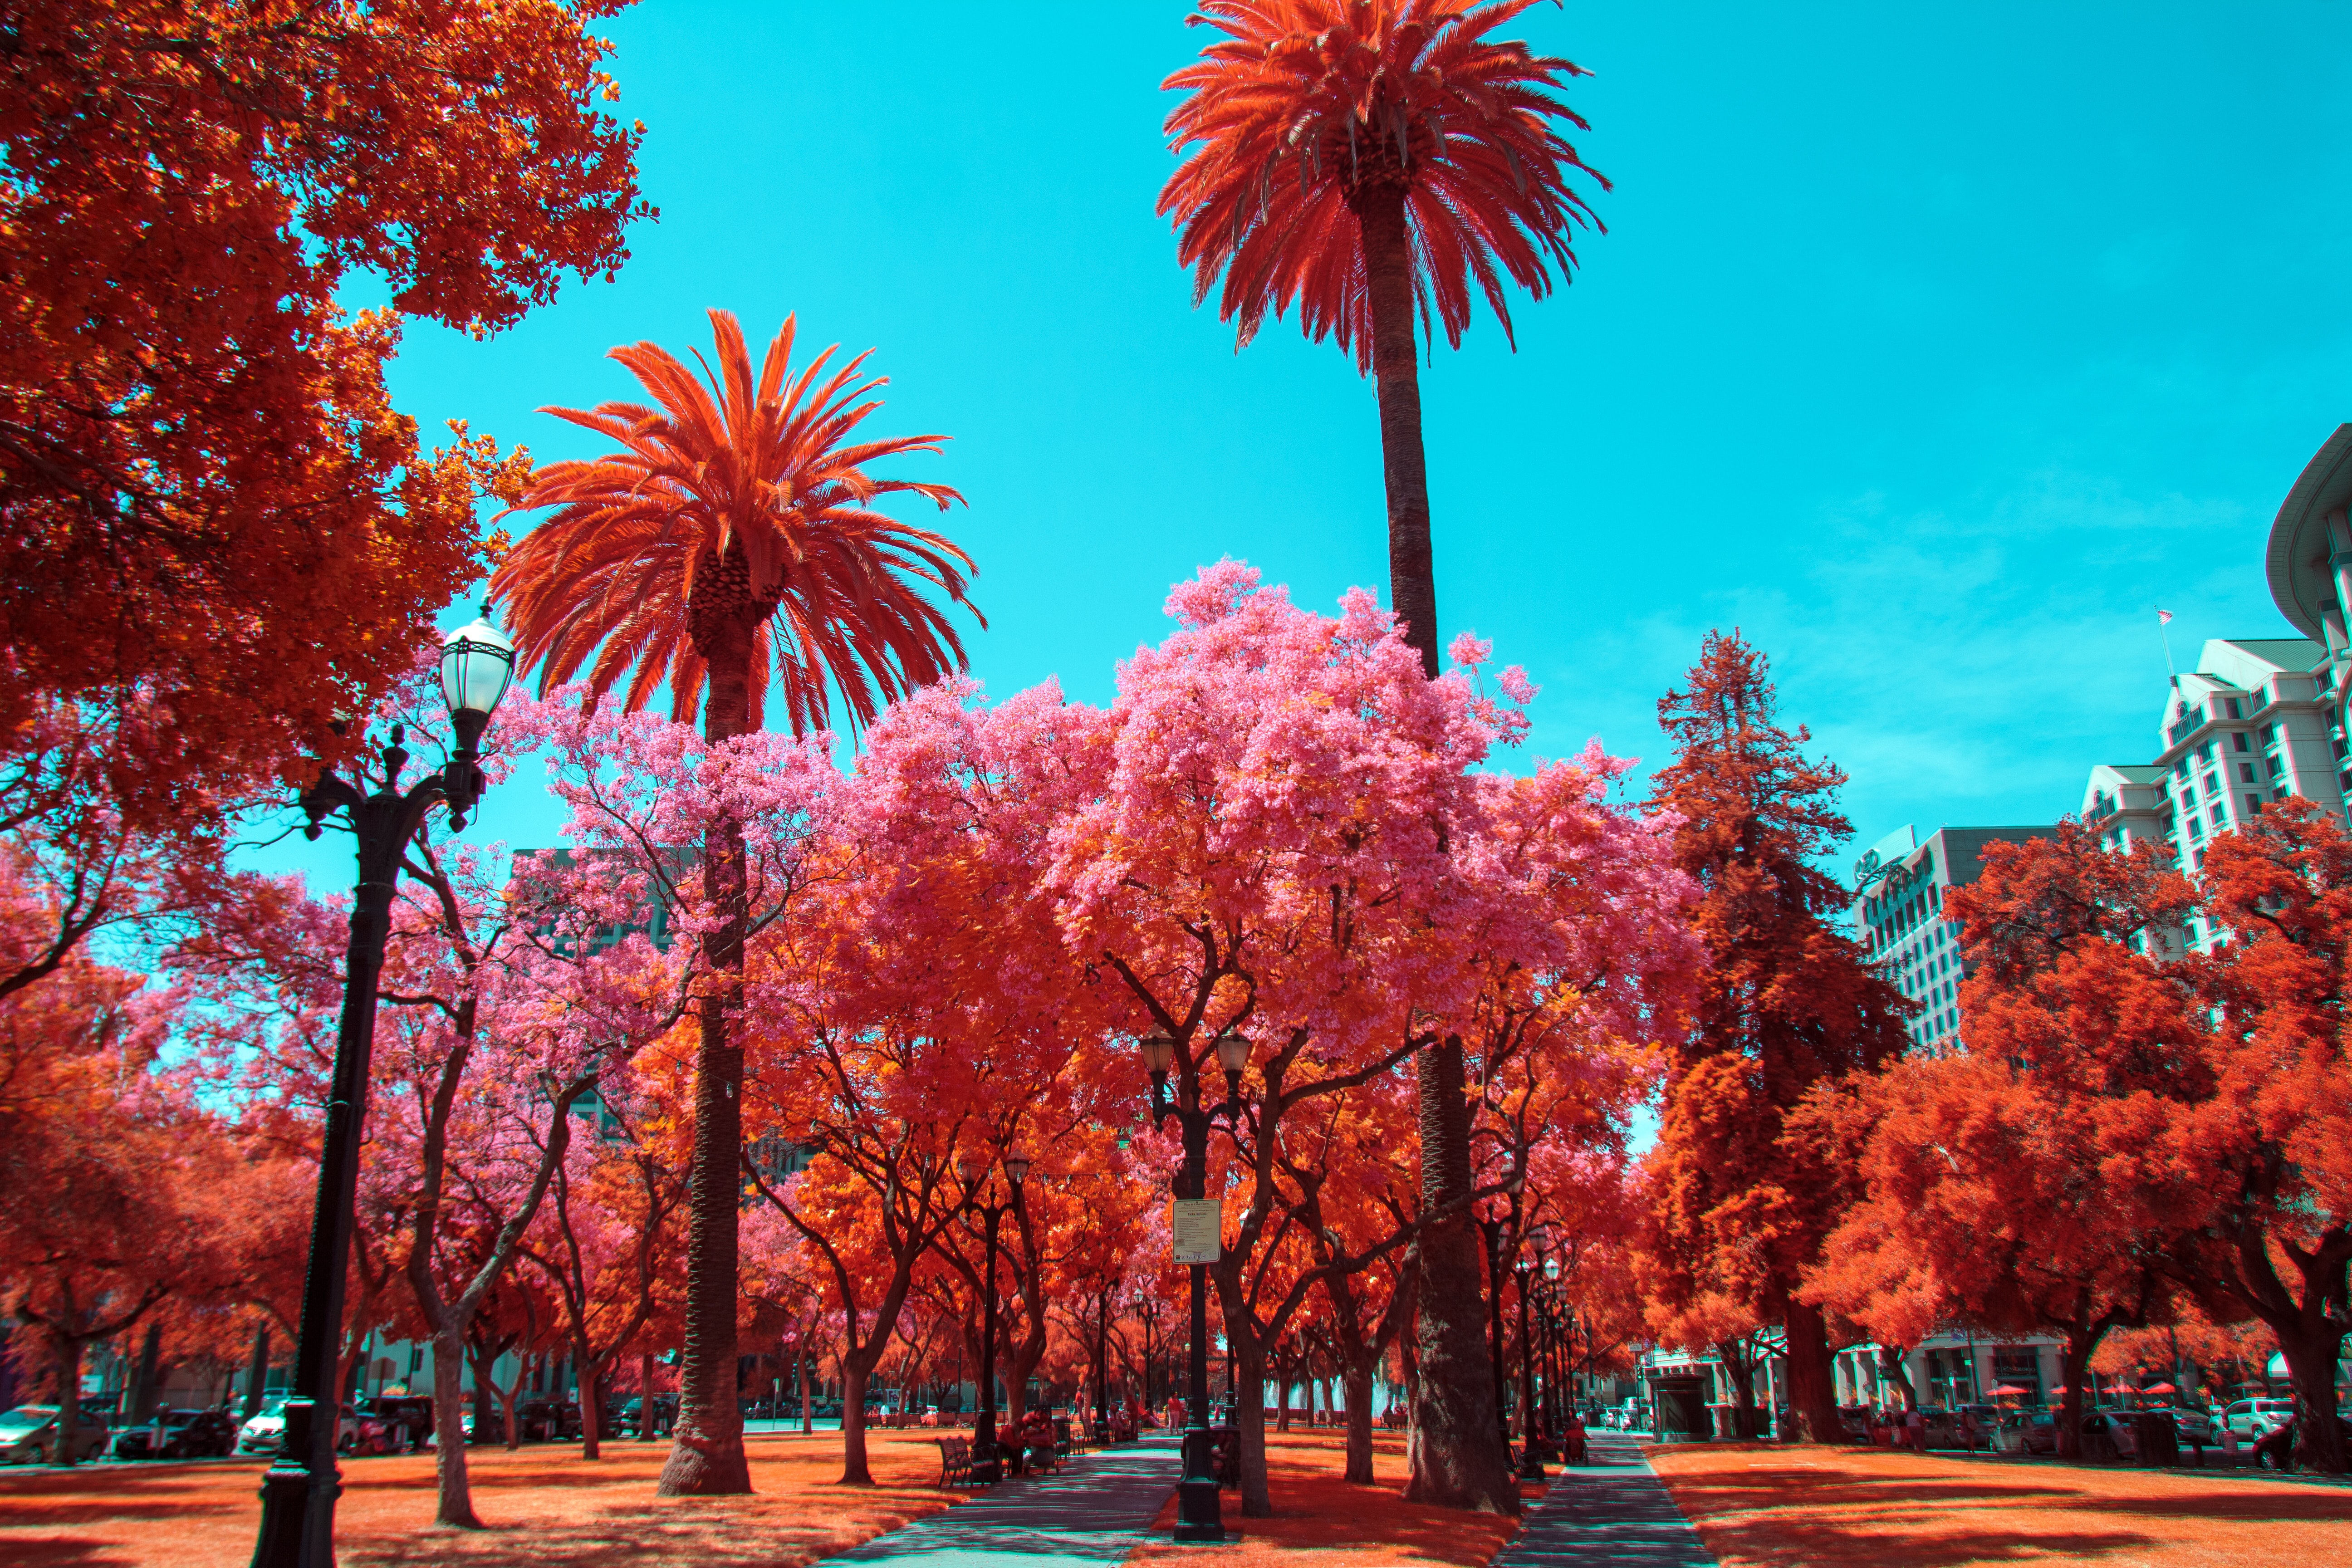 Photography Infrared 4k Ultra HD Wallpaper by Andrii Ganzevych